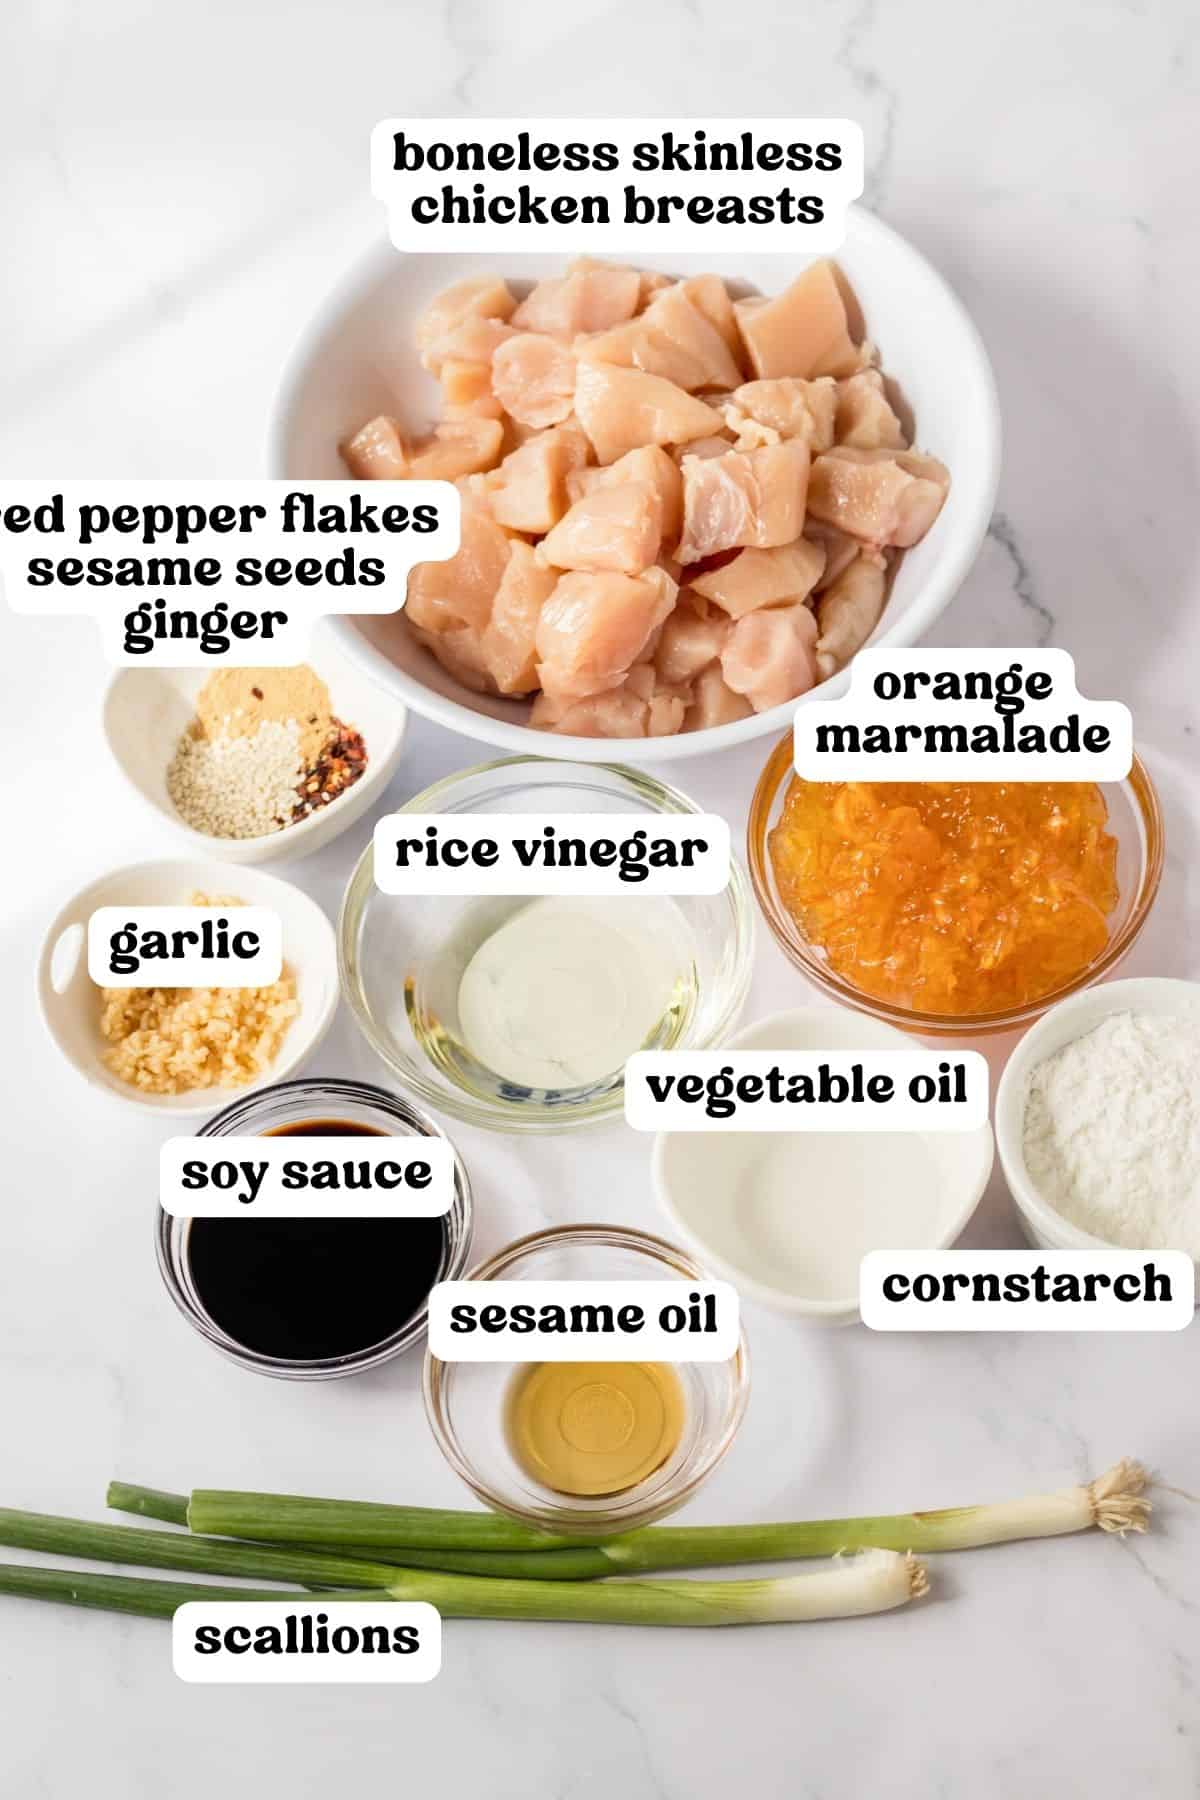 Ingredients in bowls on countertop: boneless skinless chicken breasts cubed, orange marmalade, rice vinegar, minced garlic, sesame oil, soy sauce, cornstarch, vegetable oil, red pepper flakes, ground ginger, sesame seeds, and fresh scallions.